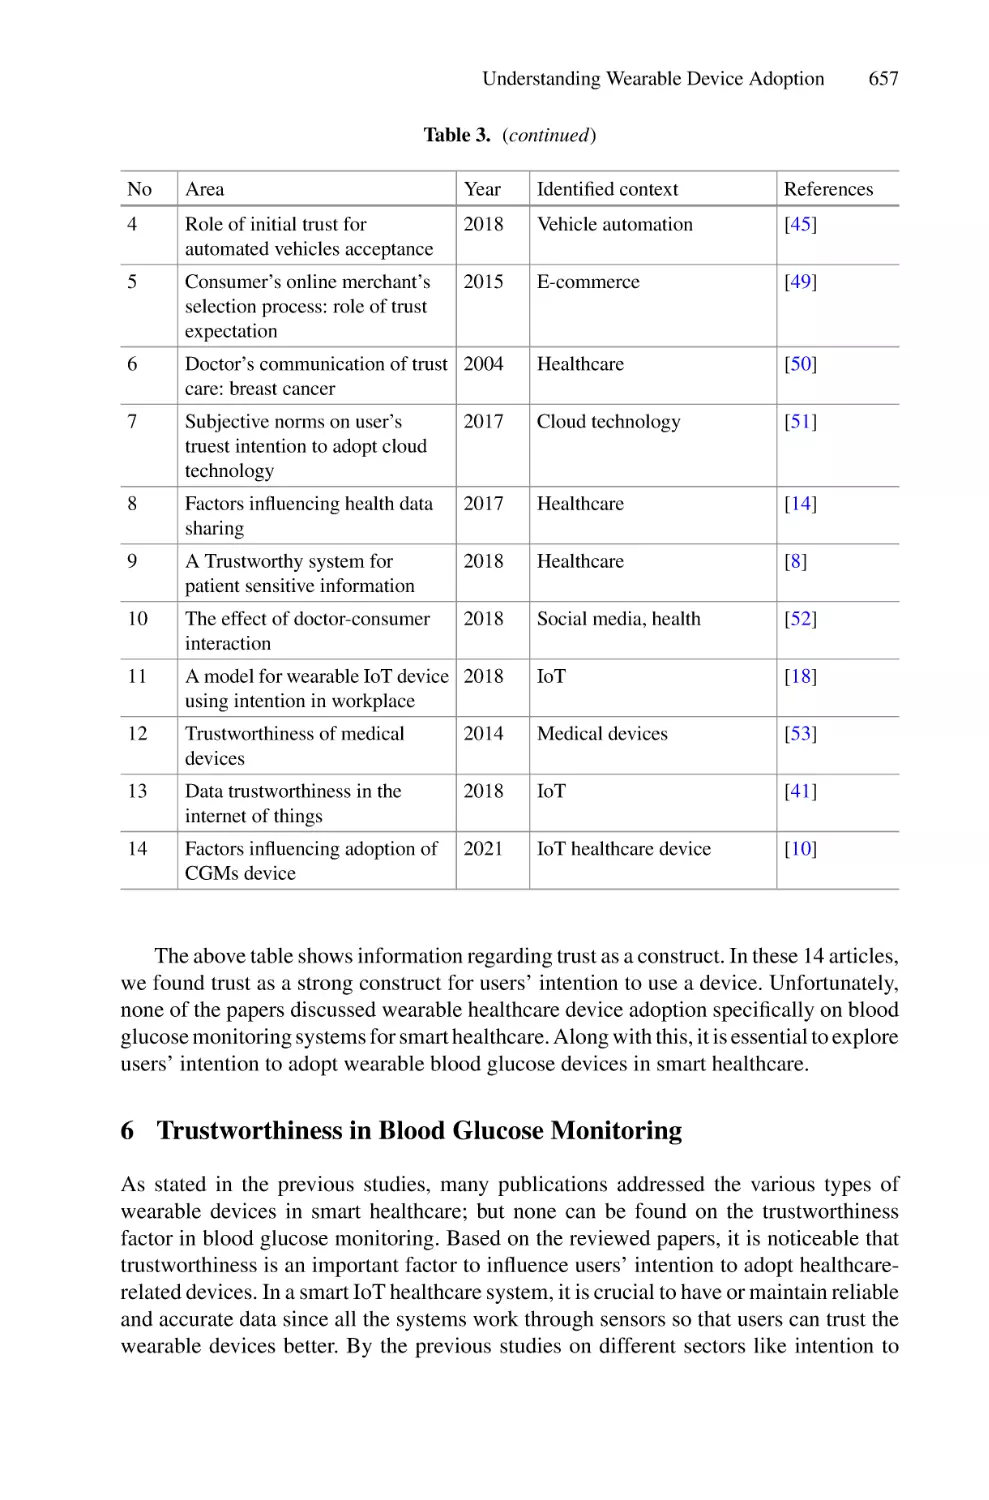 6 Trustworthiness in Blood Glucose Monitoring